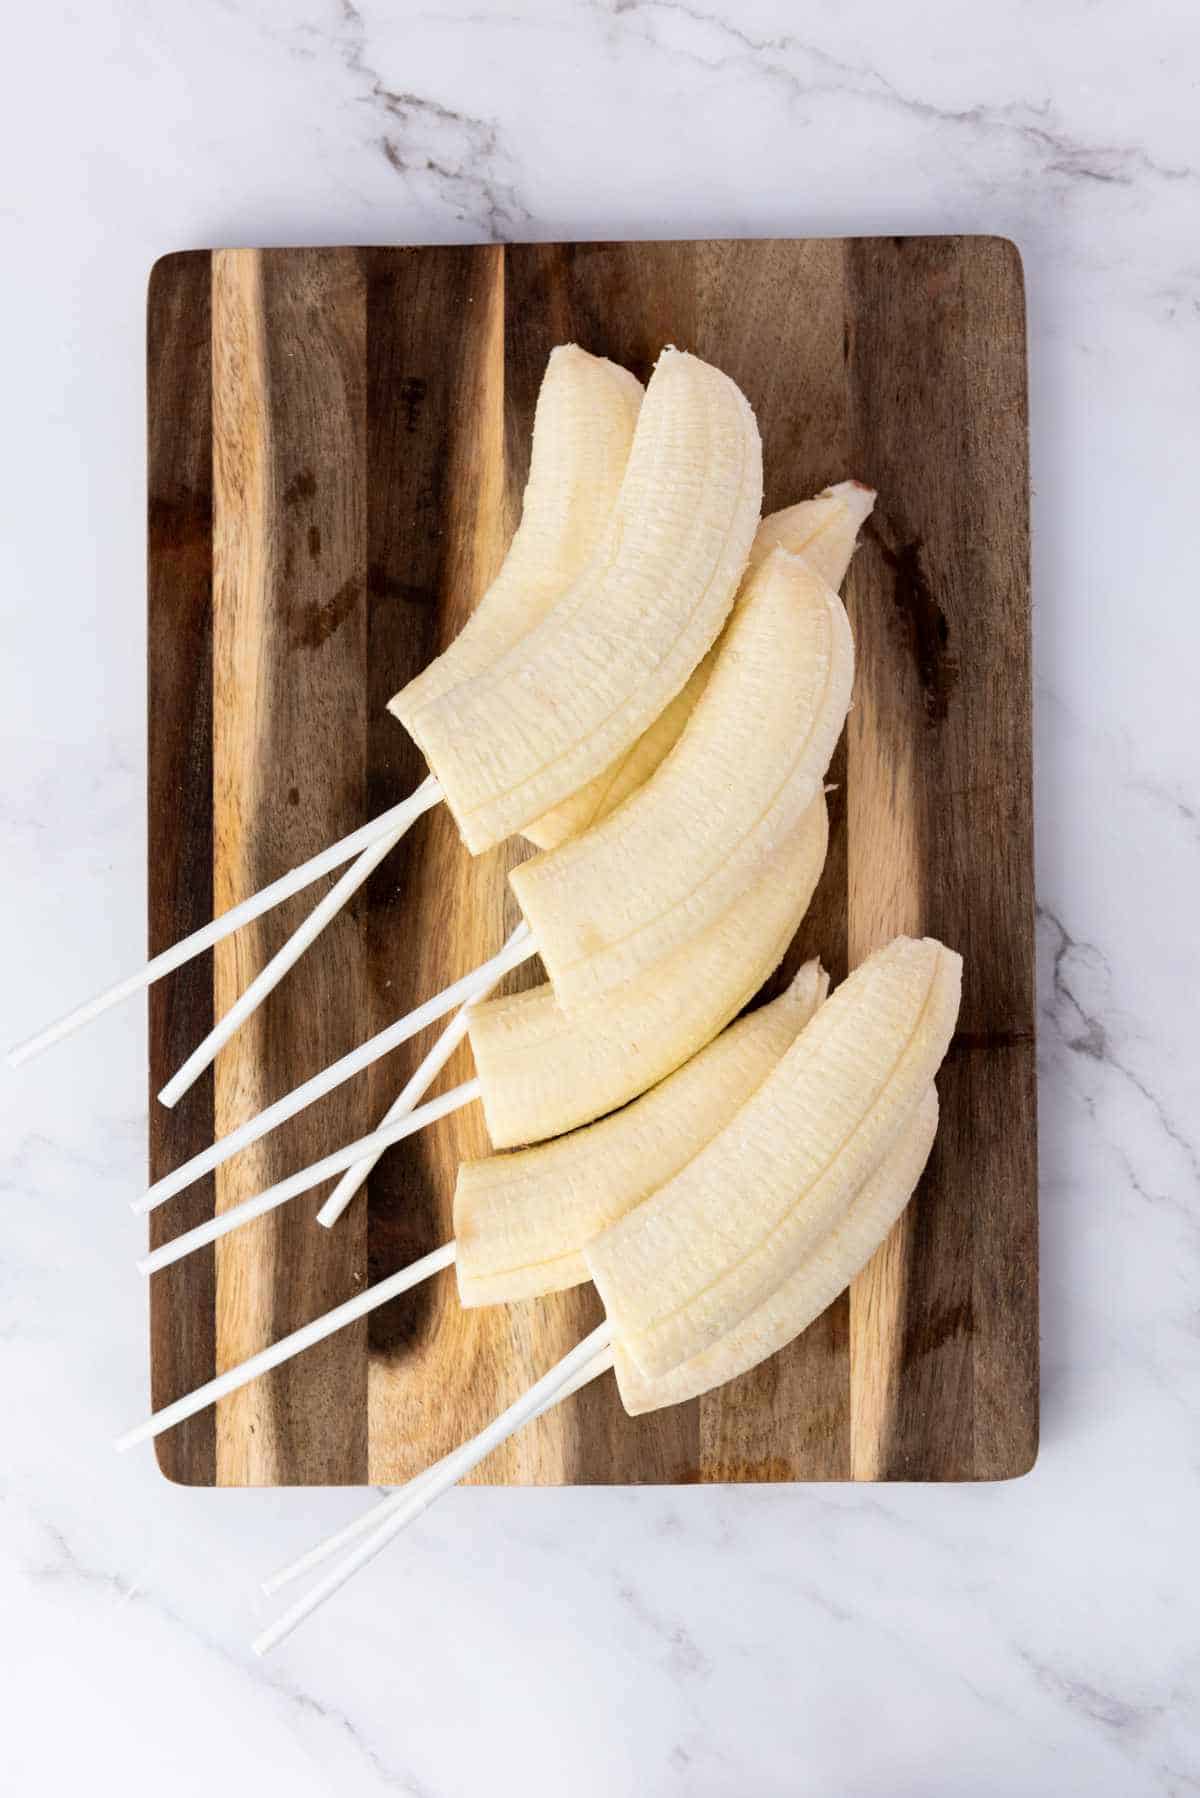 cake pop sticks inserted into one even of each banana half.